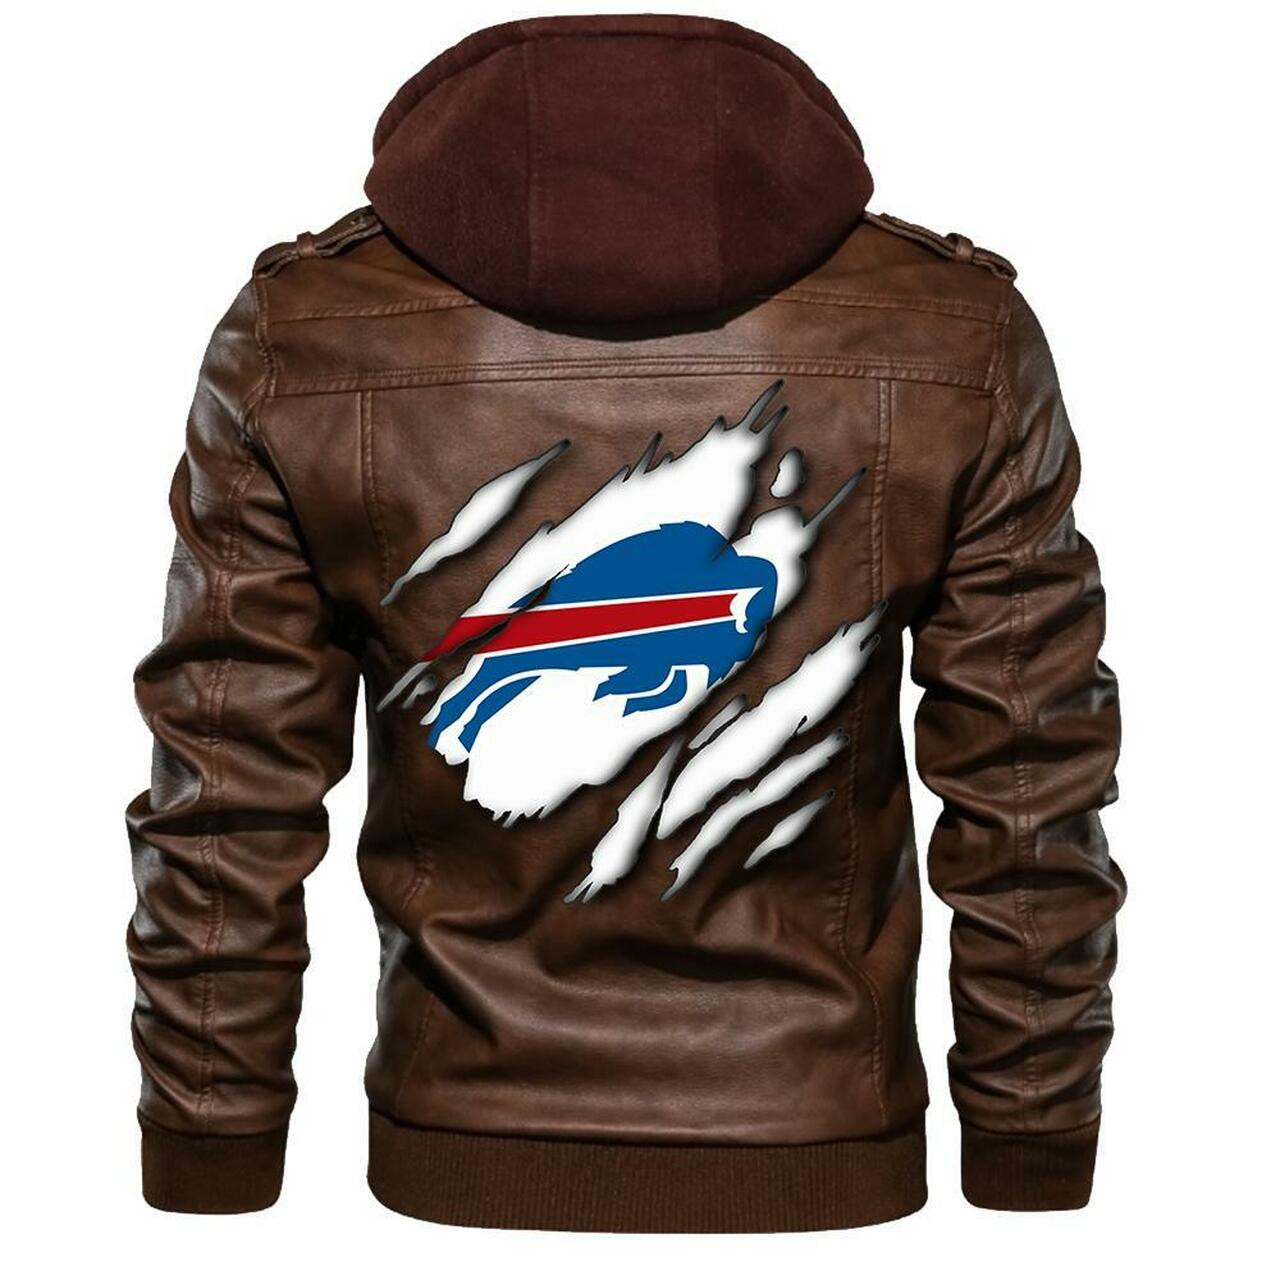 Check out and find the right leather jacket below 359